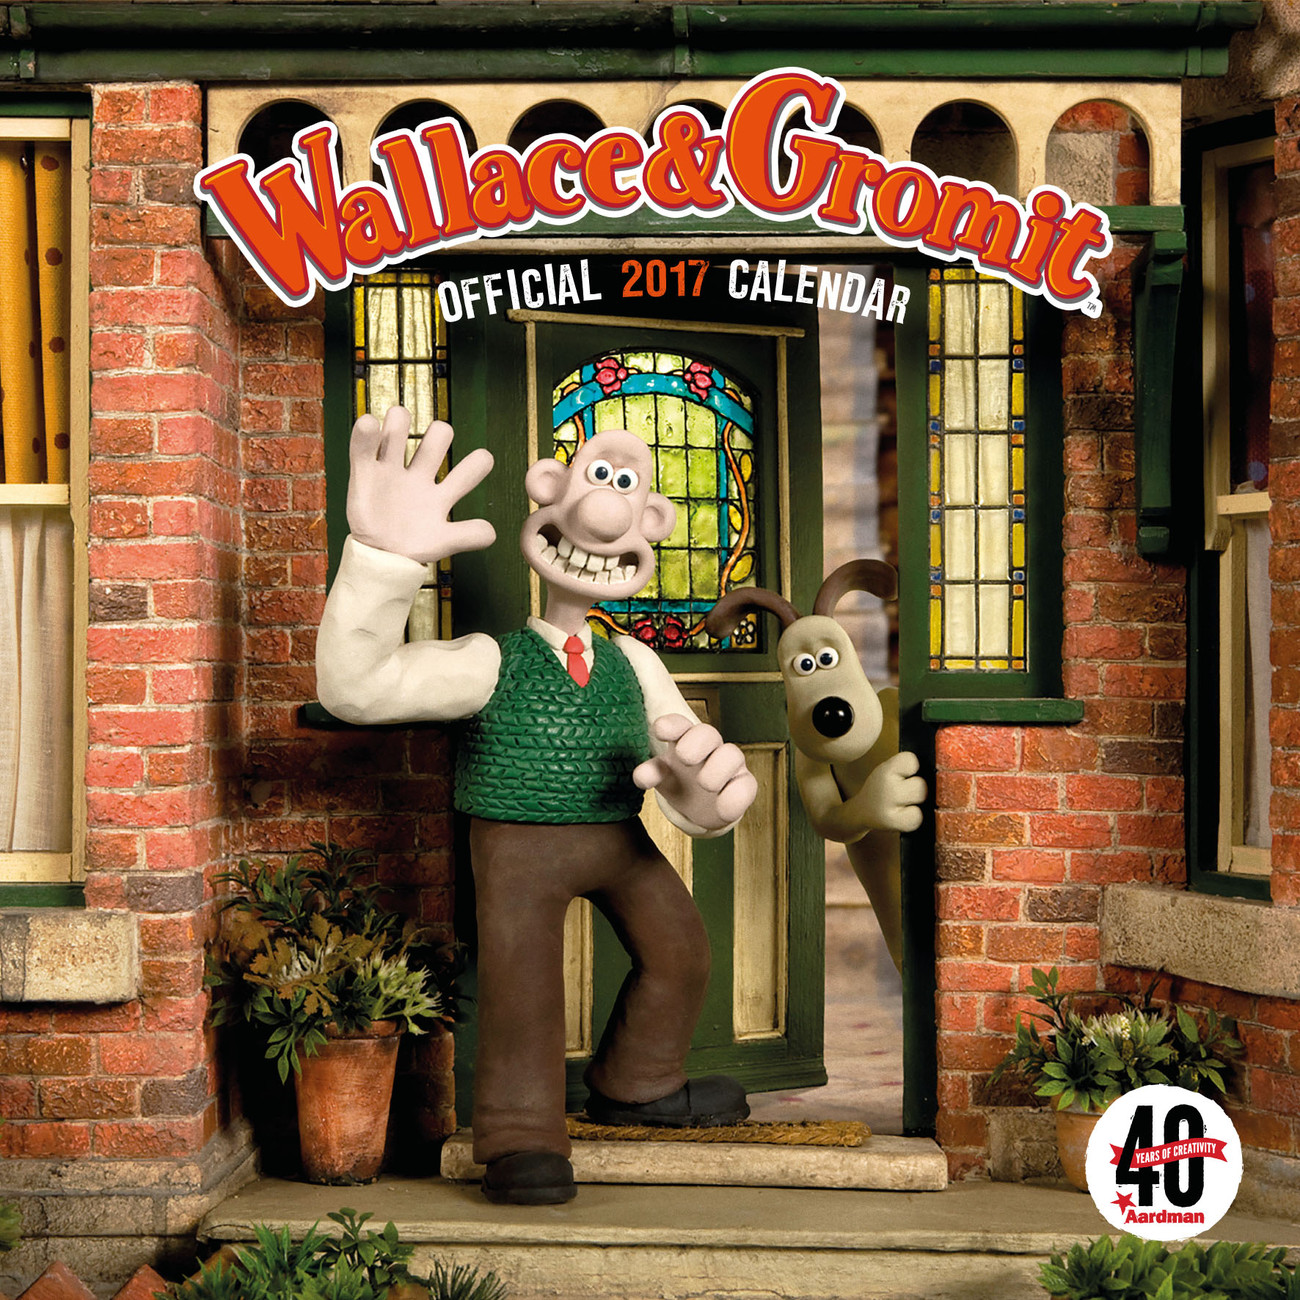 Wallace & Gromit (Aasrdman 40th) - Calendars 2021 on UKposters/UKposters